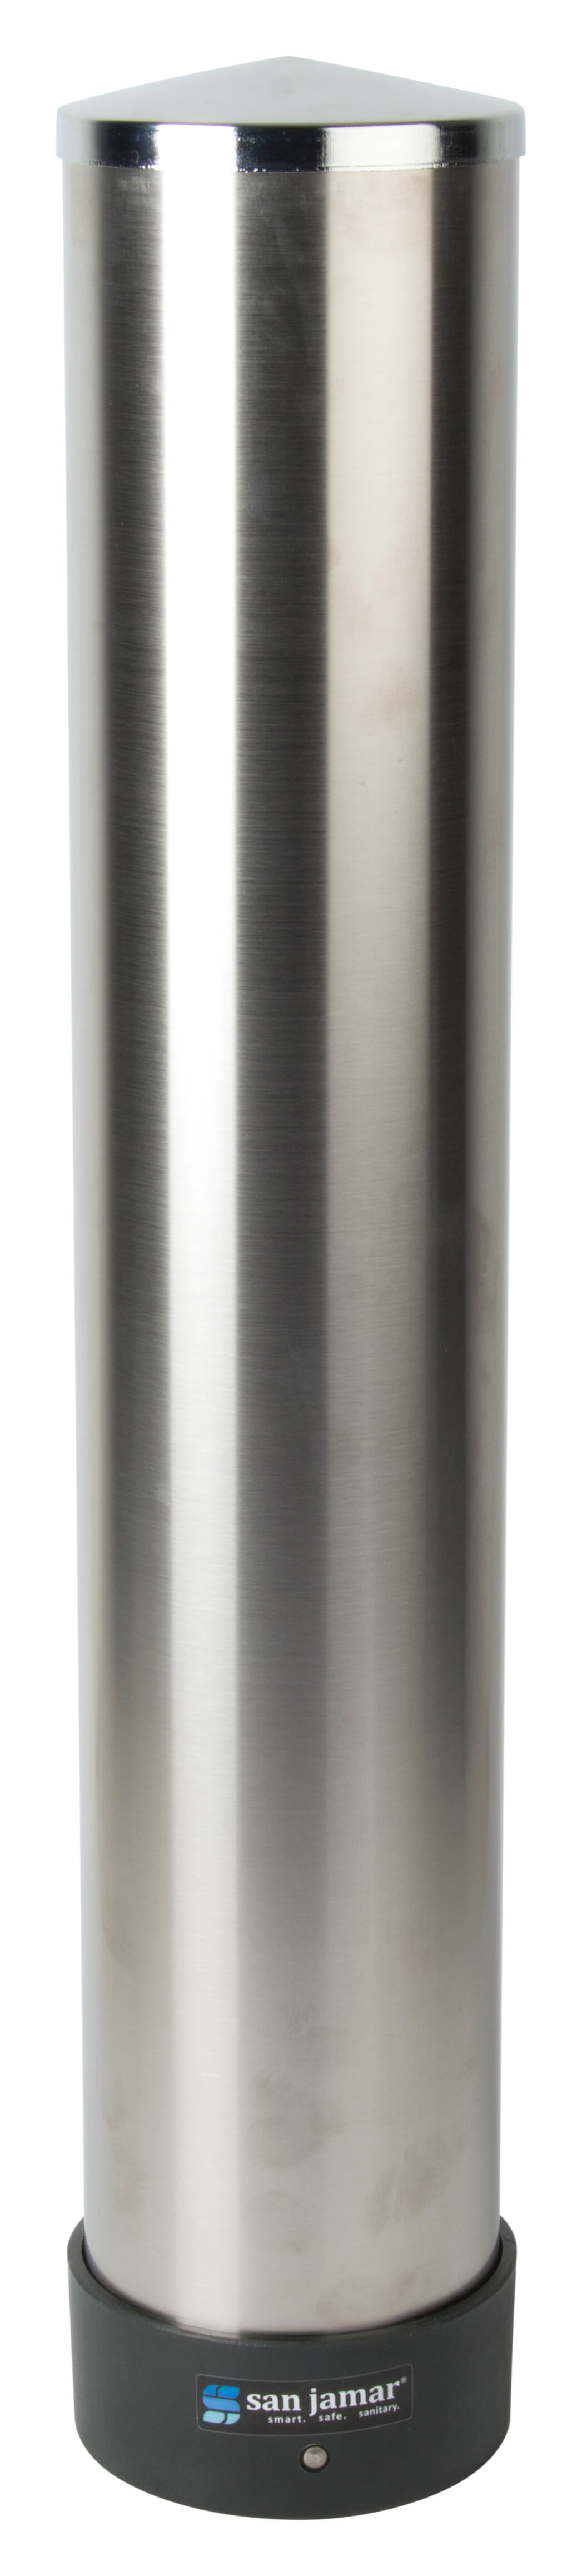 Cup Dispenser 'Pull', stainless steel - for cups 0,3l - 0,4l